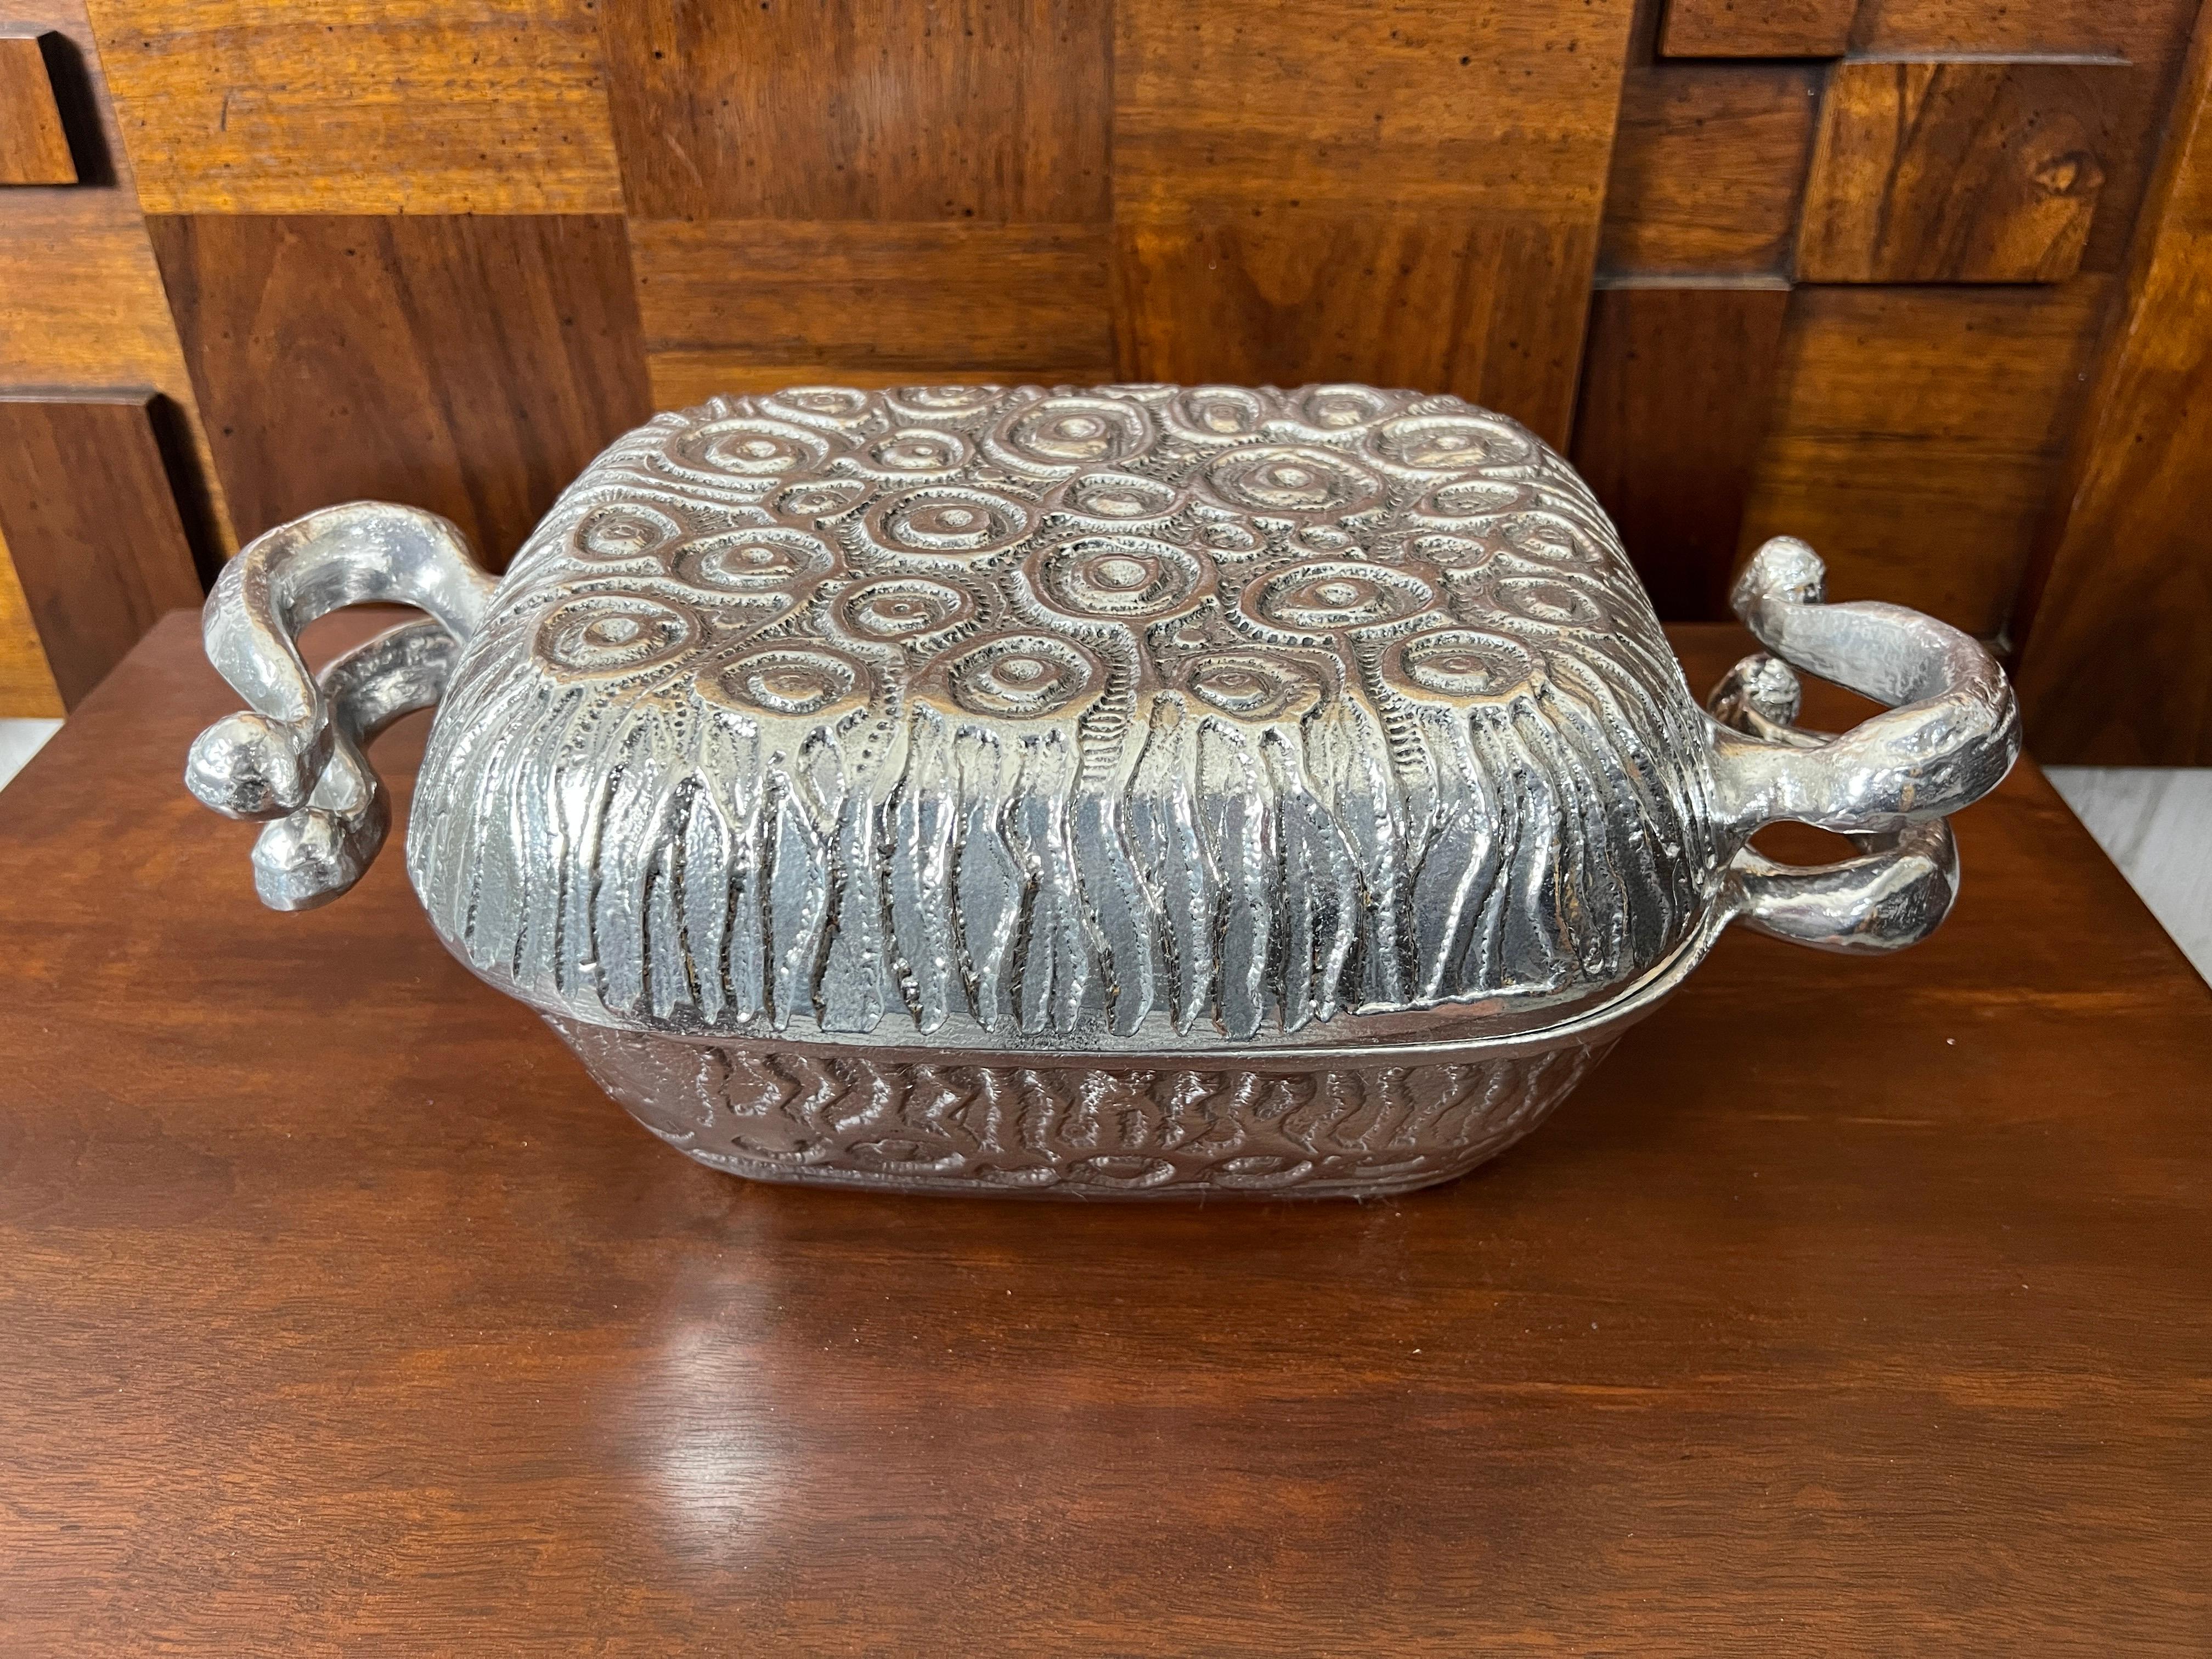 Vintage casserole dish with covered lid by Donald Drumm.  Obviously this has never been used by it's condition, Cast aluminum with a festive design on the exterior. Great for entertaining.